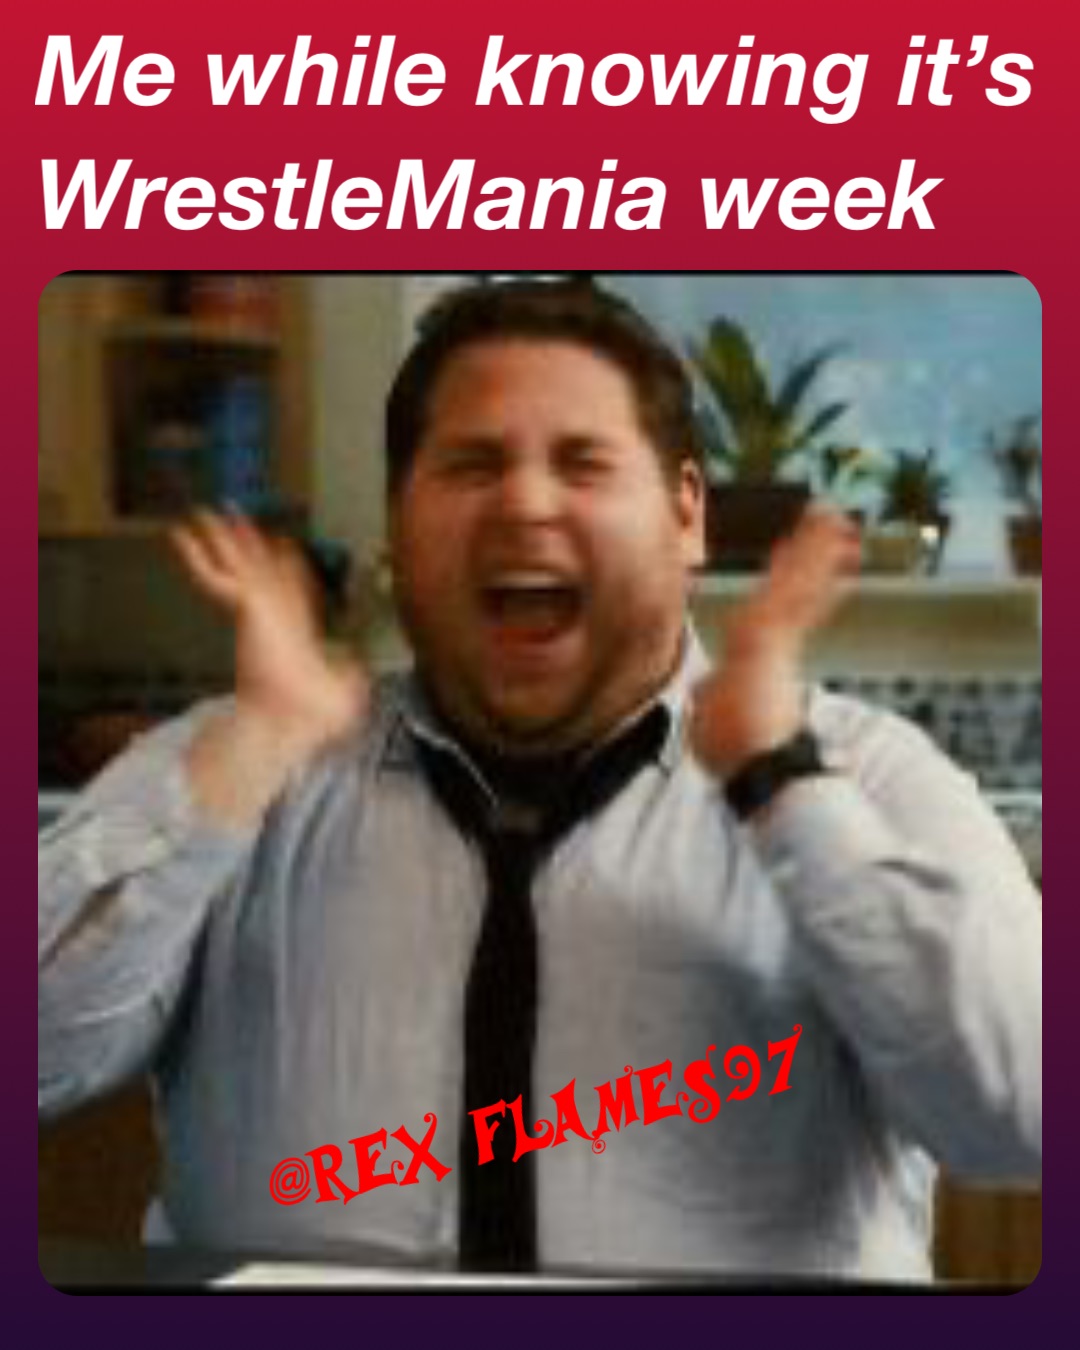 Me while knowing it’s WrestleMania week